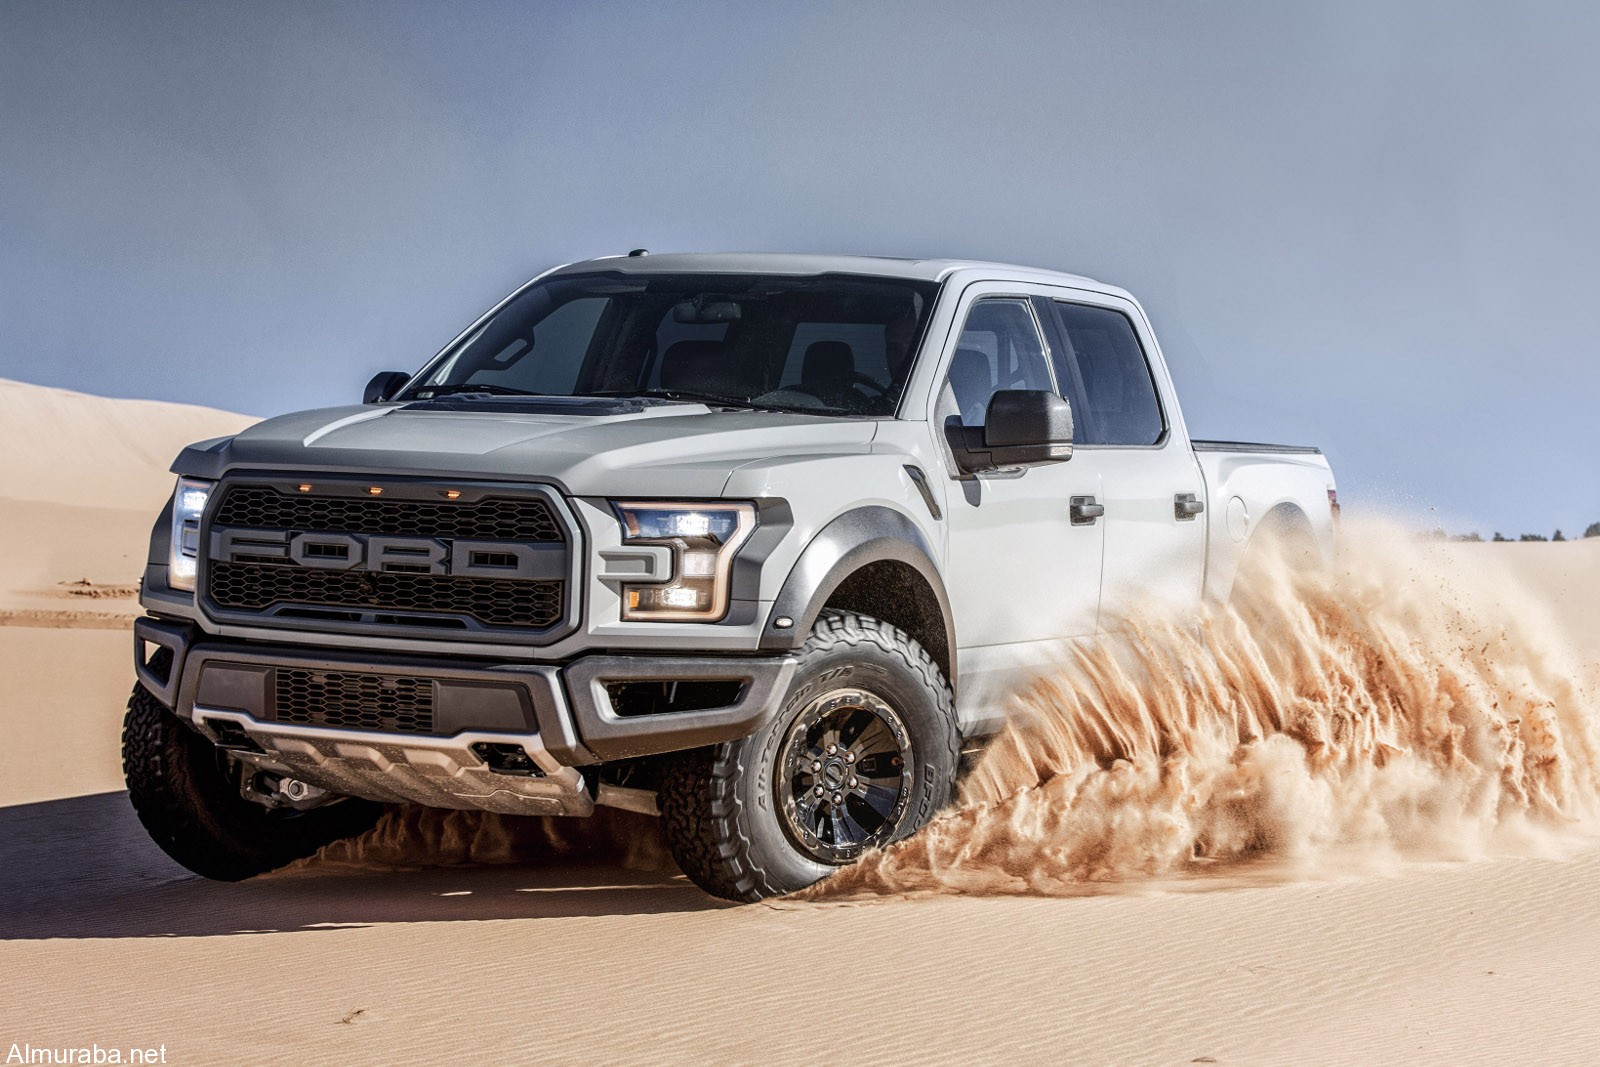 The all-new Ford F-150 Raptor SuperCrew with four full-size doors adds room for passengers and gear, expanding choice and versatility in the toughest, smartest, most capable F-150 Raptor ever.